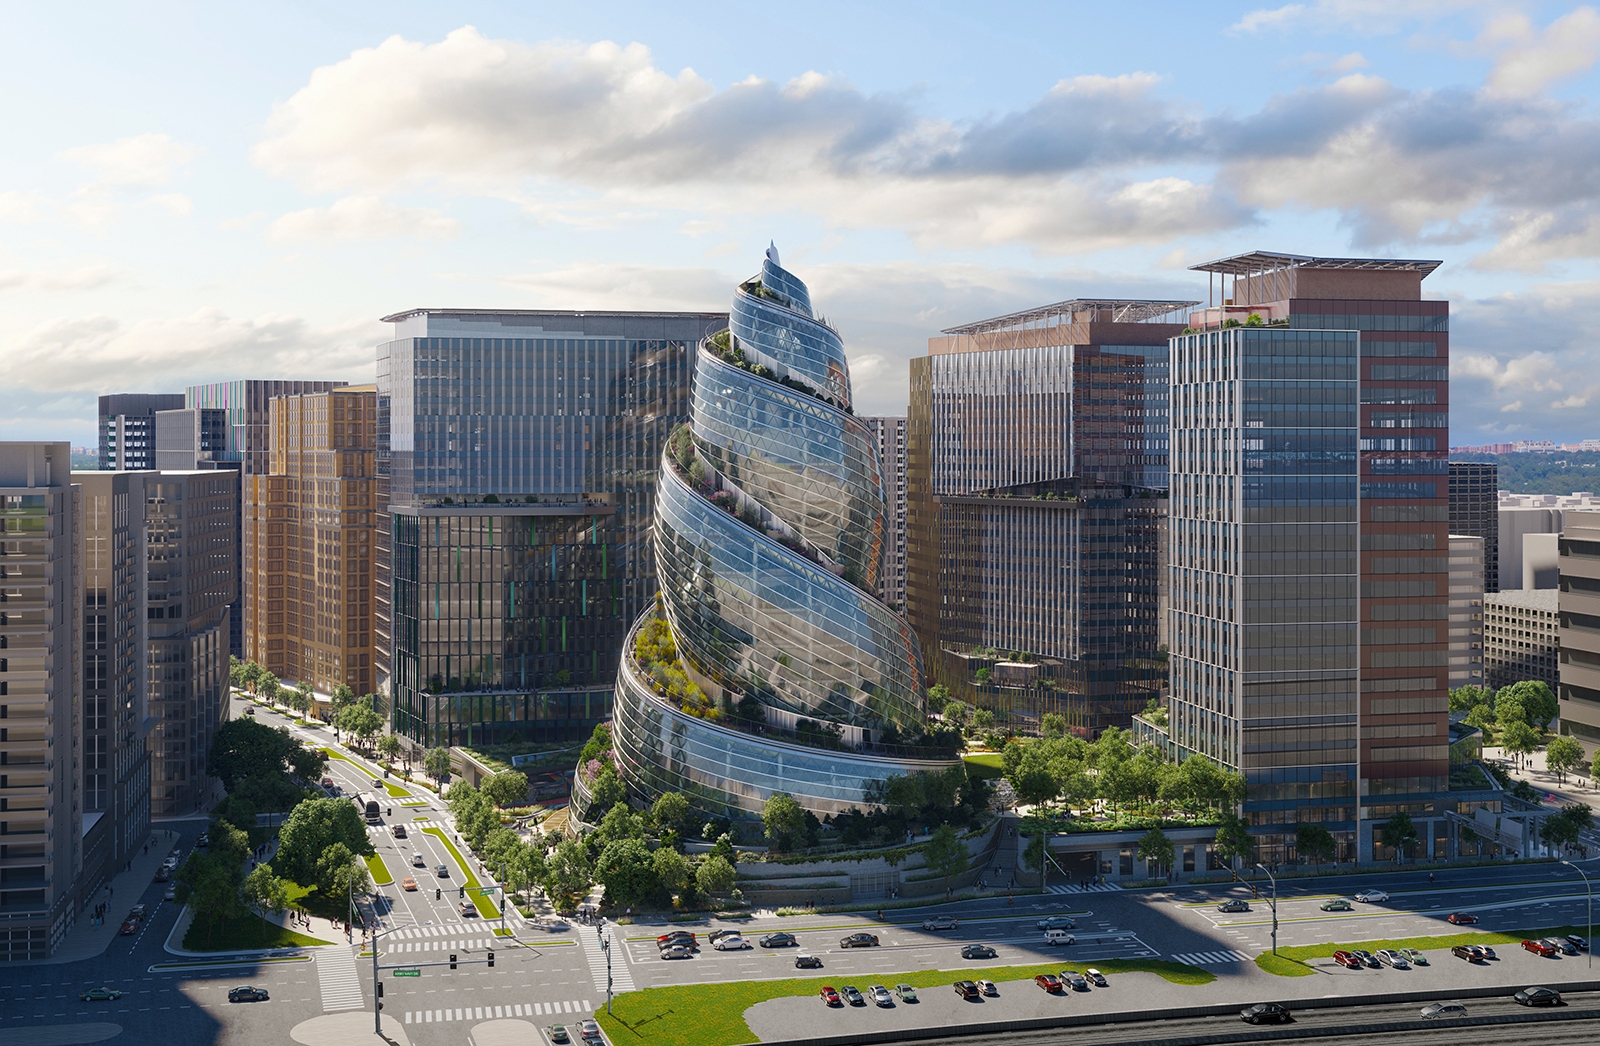 An image of the helix building at Amazon's HQ2 surrounding by other office buildings and greenery in the area.